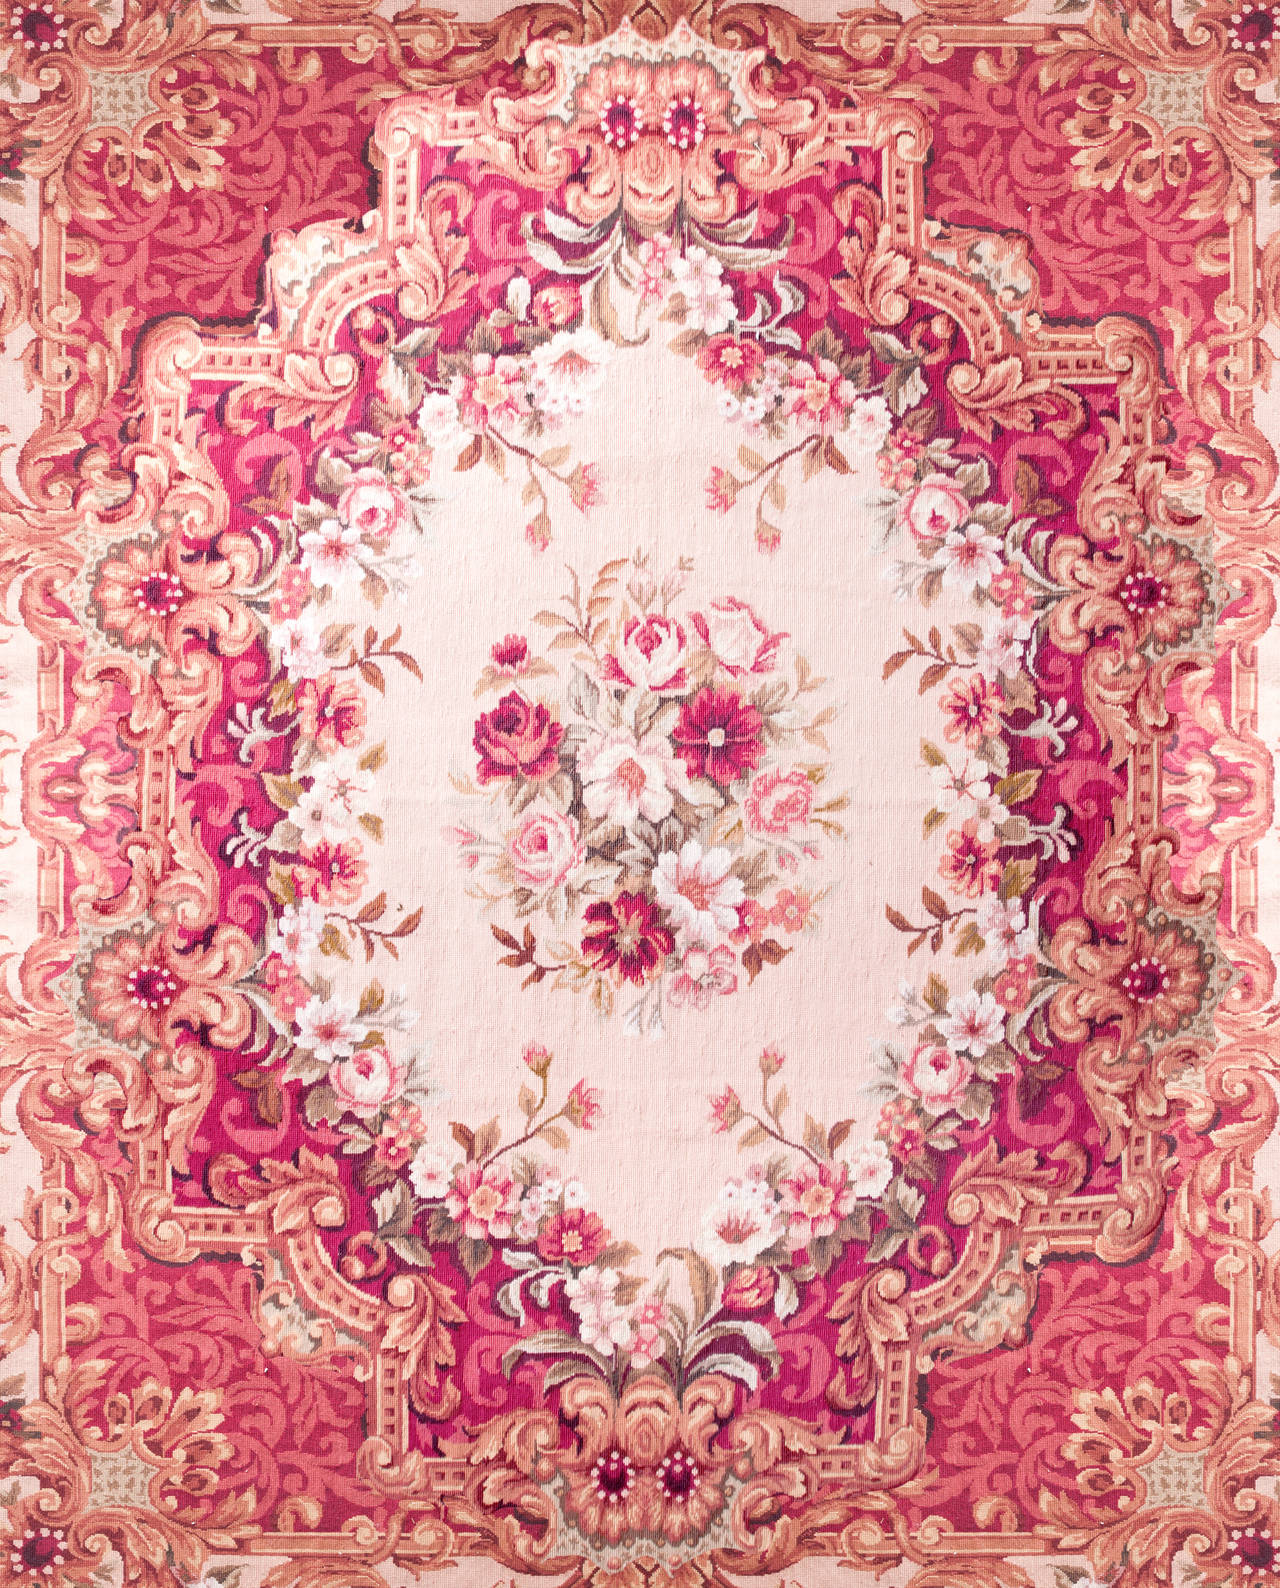 Room sized hand-stitched needlepoint rug in a flamboyant Rococo style with floral bouquets, arabesques, shells and ribbons, beautiful floral bouquet in the ivory ground center medallion. Mixed pallet of watermelon pink, fuchsia and creamy peach.